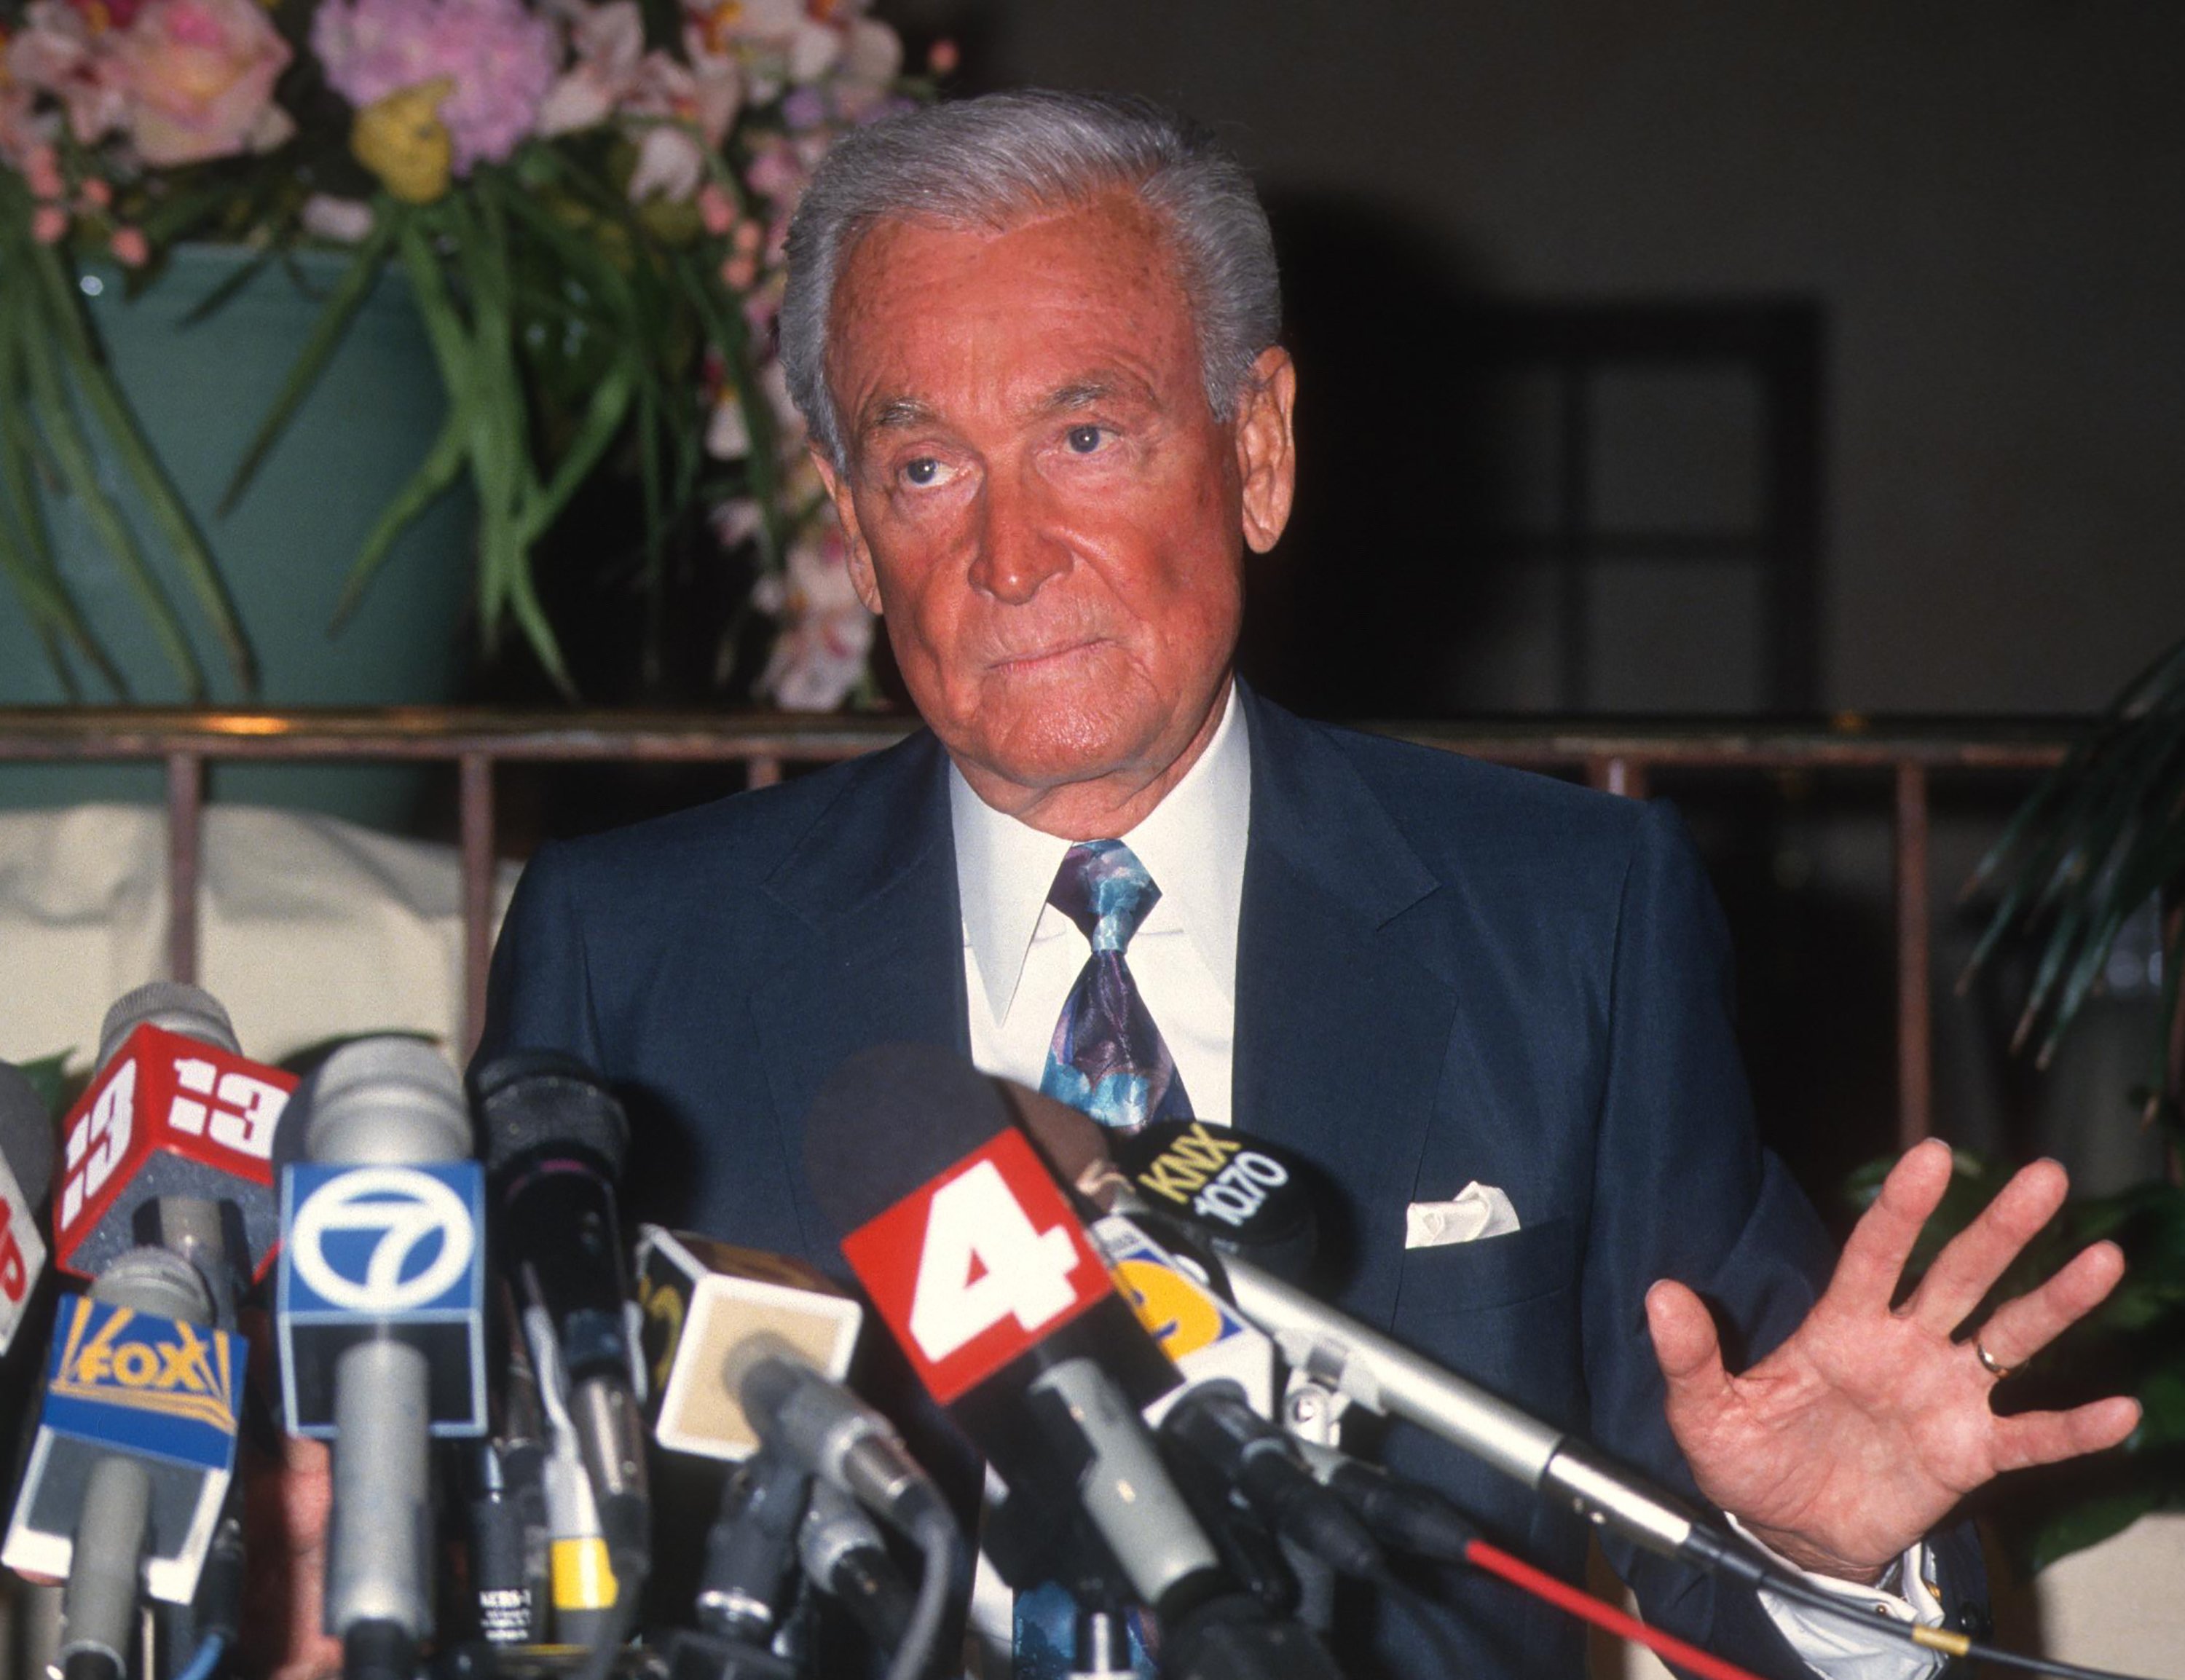 Bob Barker attends Press Conference Regarding Lawsuit at Ma Maison Hotel in West Hollywood, California on June 8, 1994. | Source: Getty Images